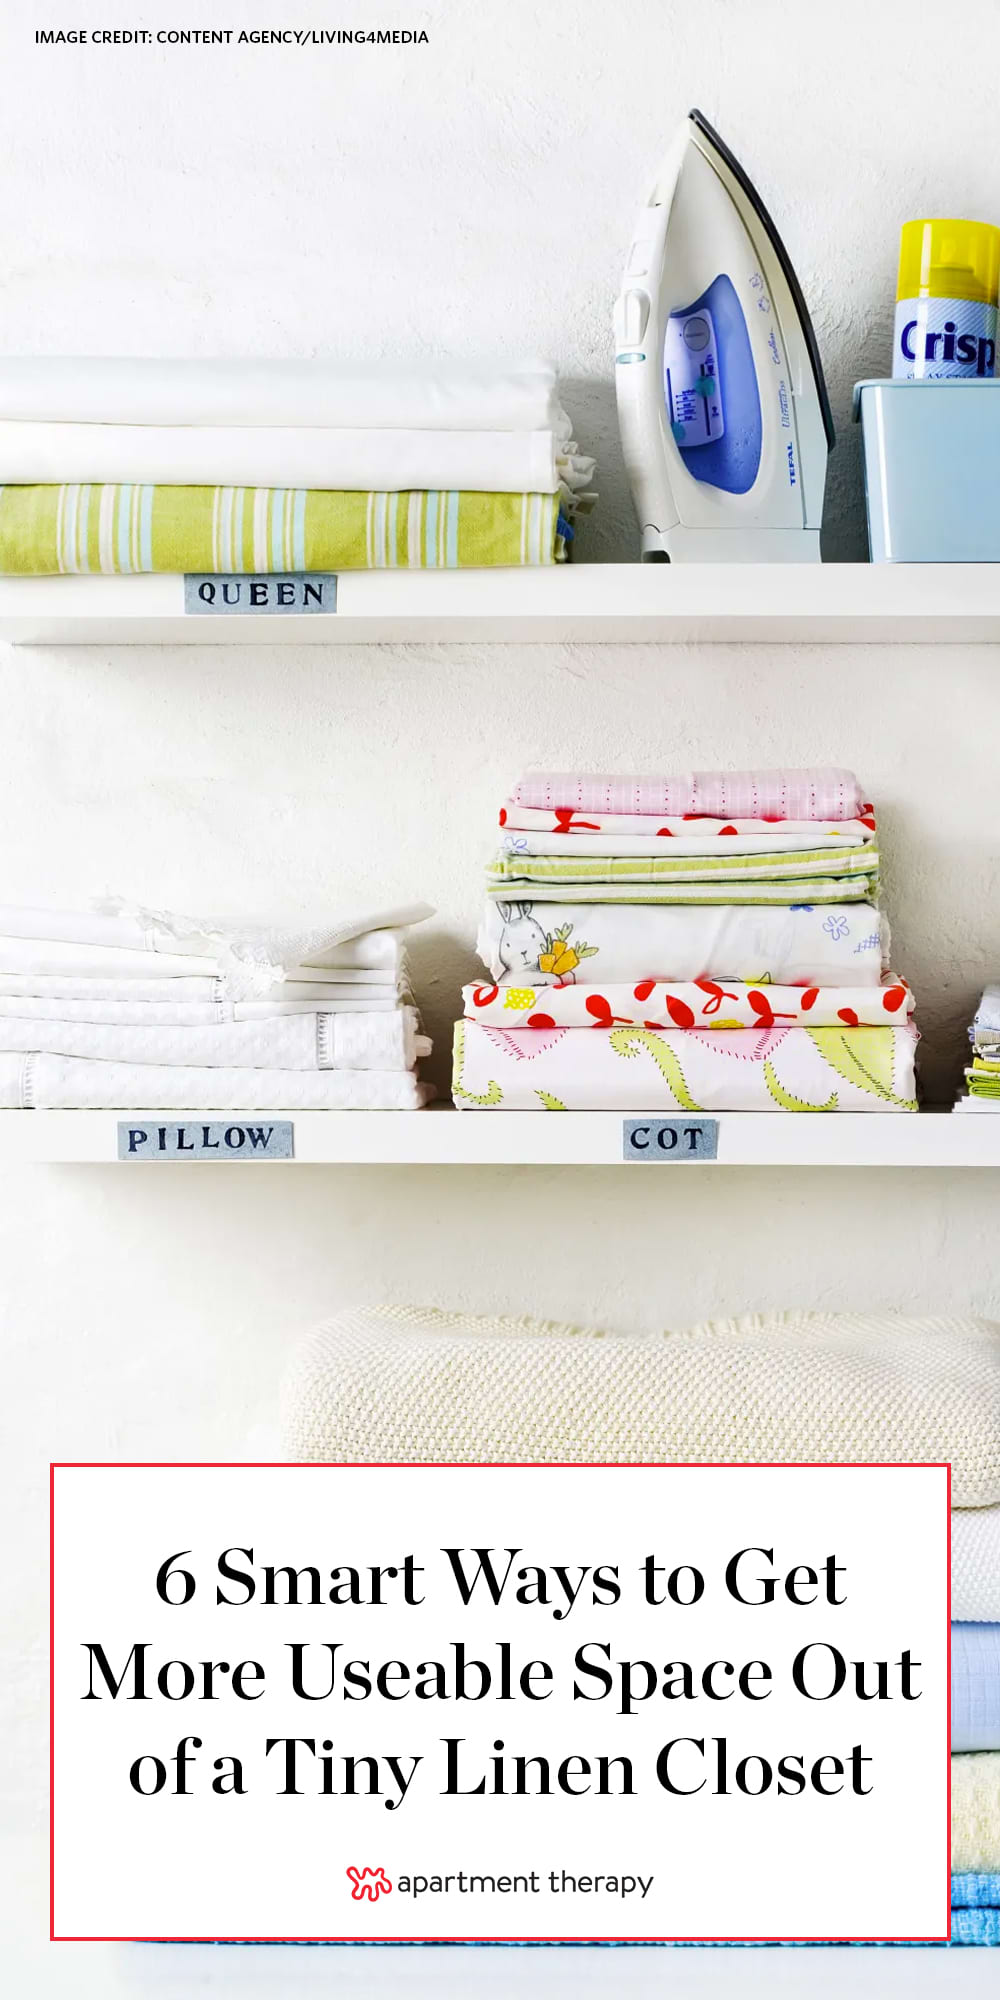 6 Ways to Get More Space Out of a Tiny Linen Closet